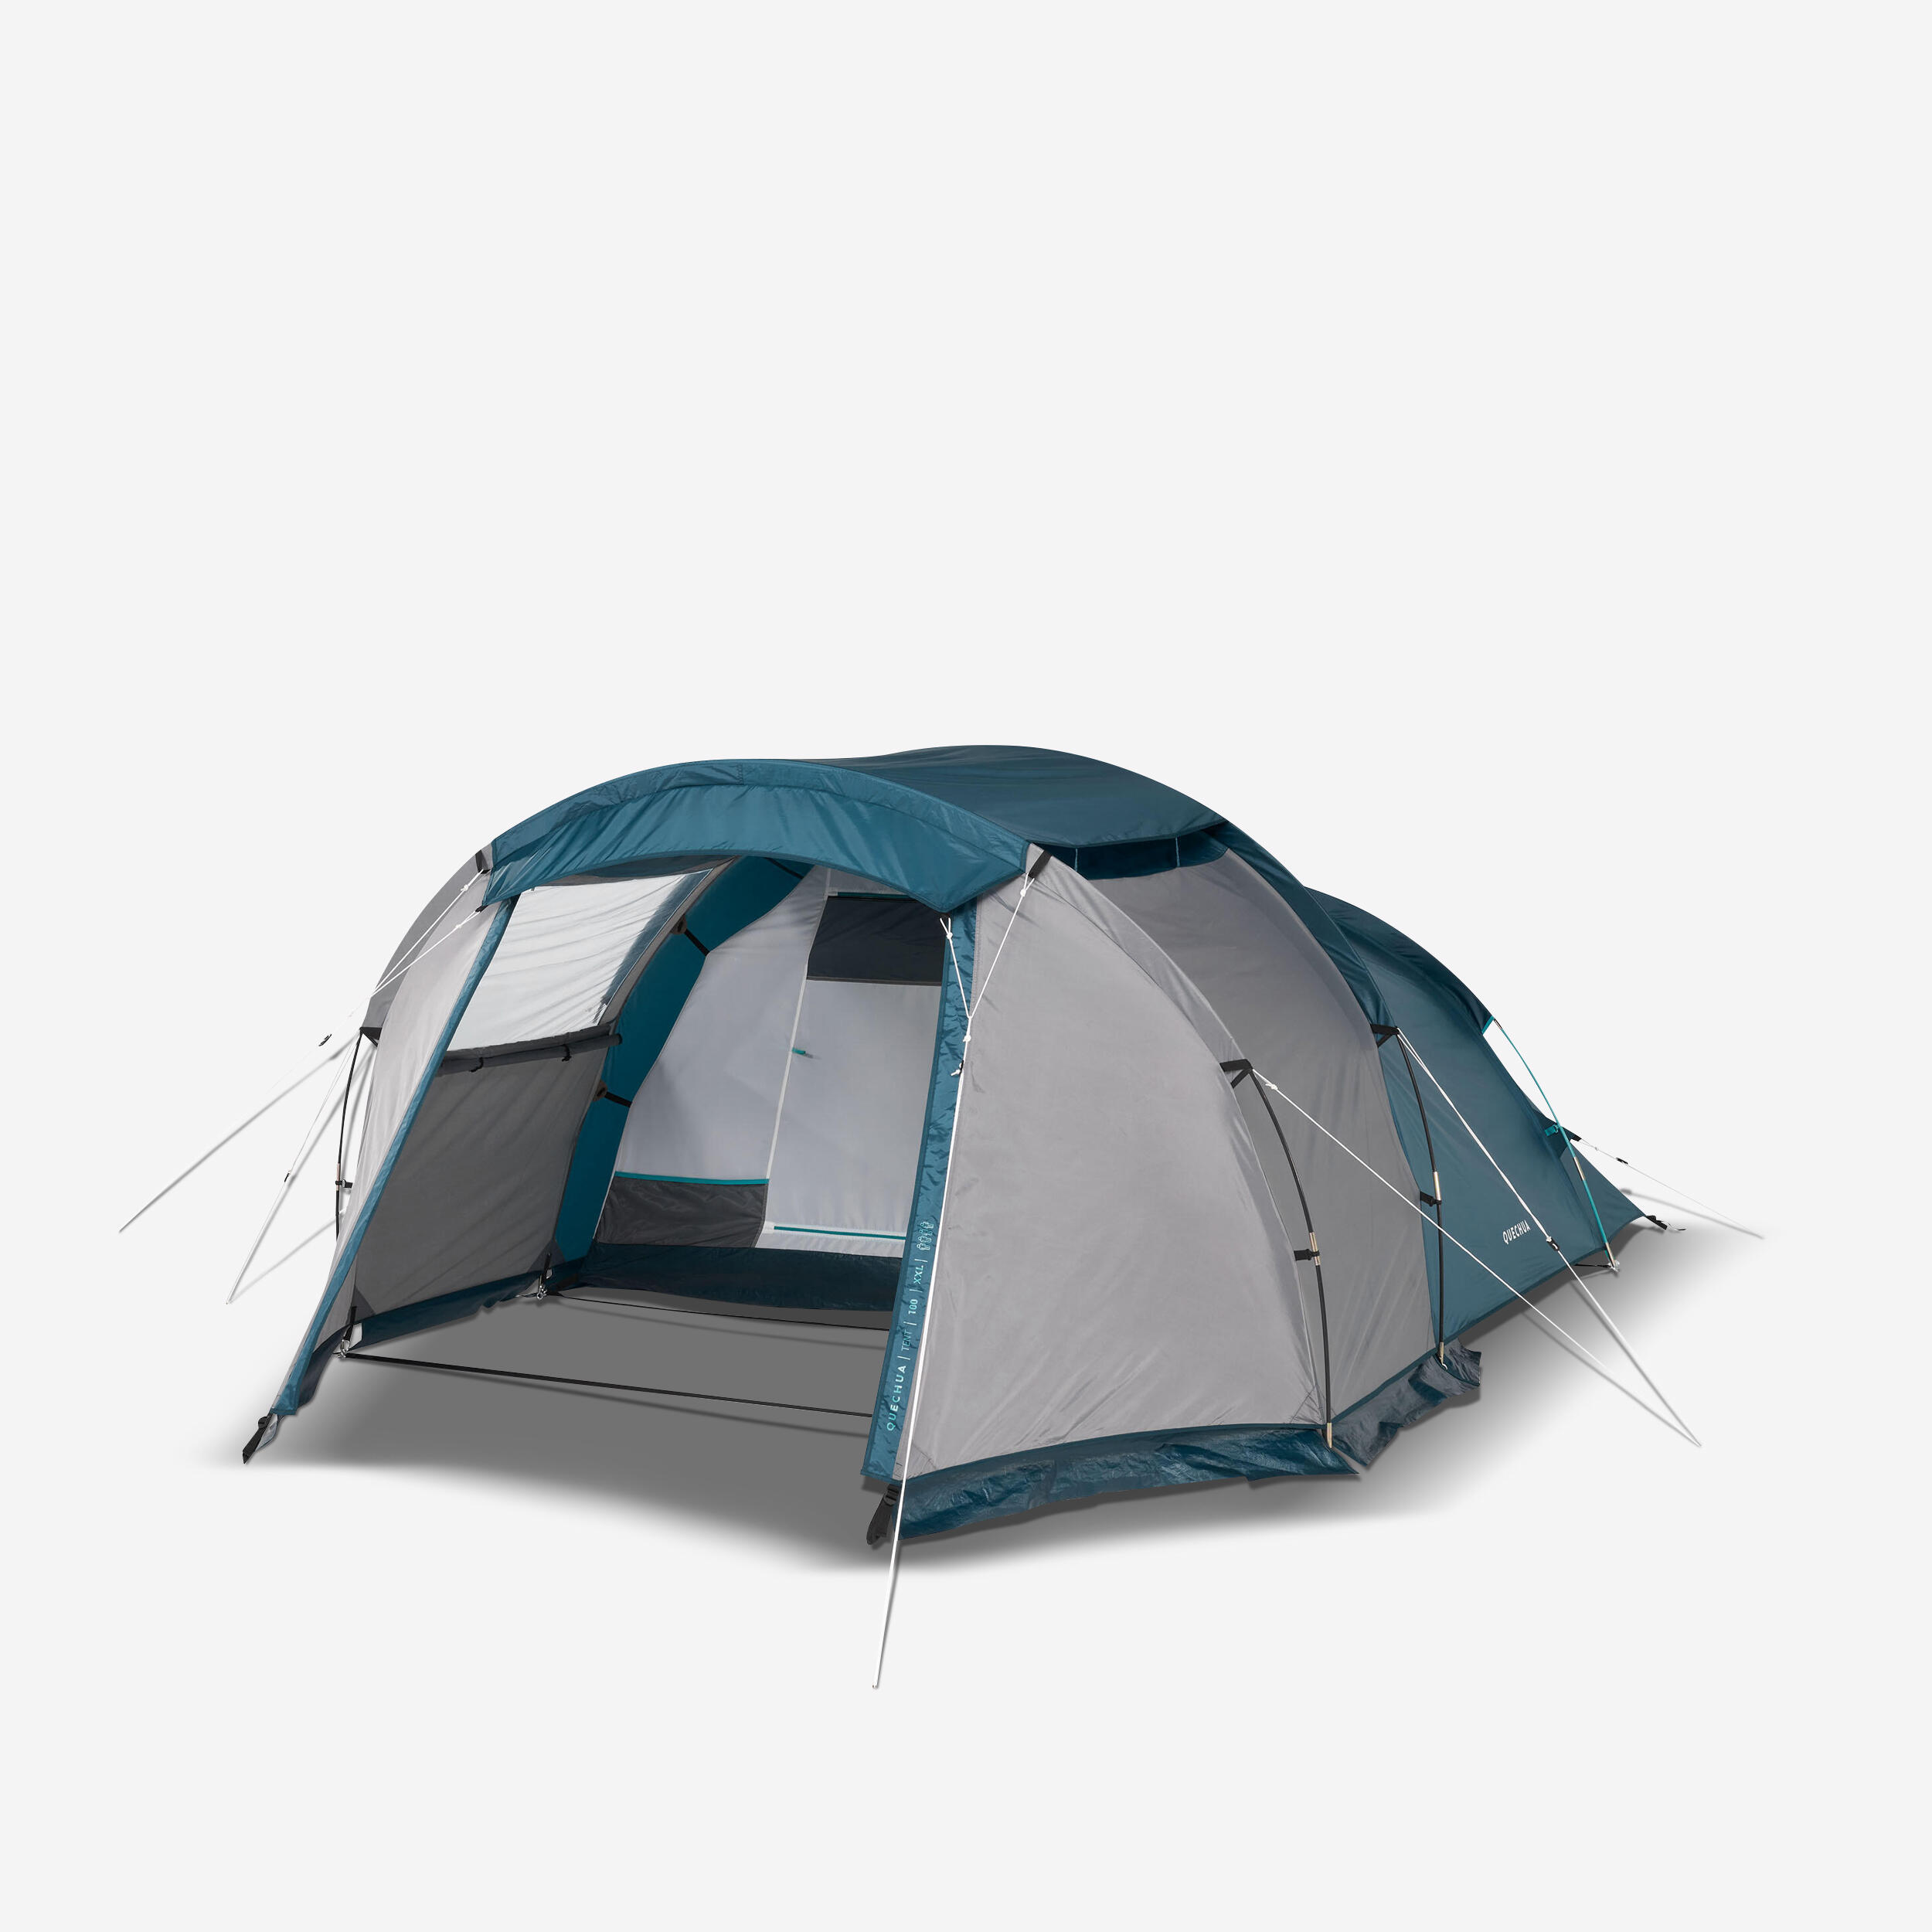 Camping tent - MH100 XXL - 4 person 1/15